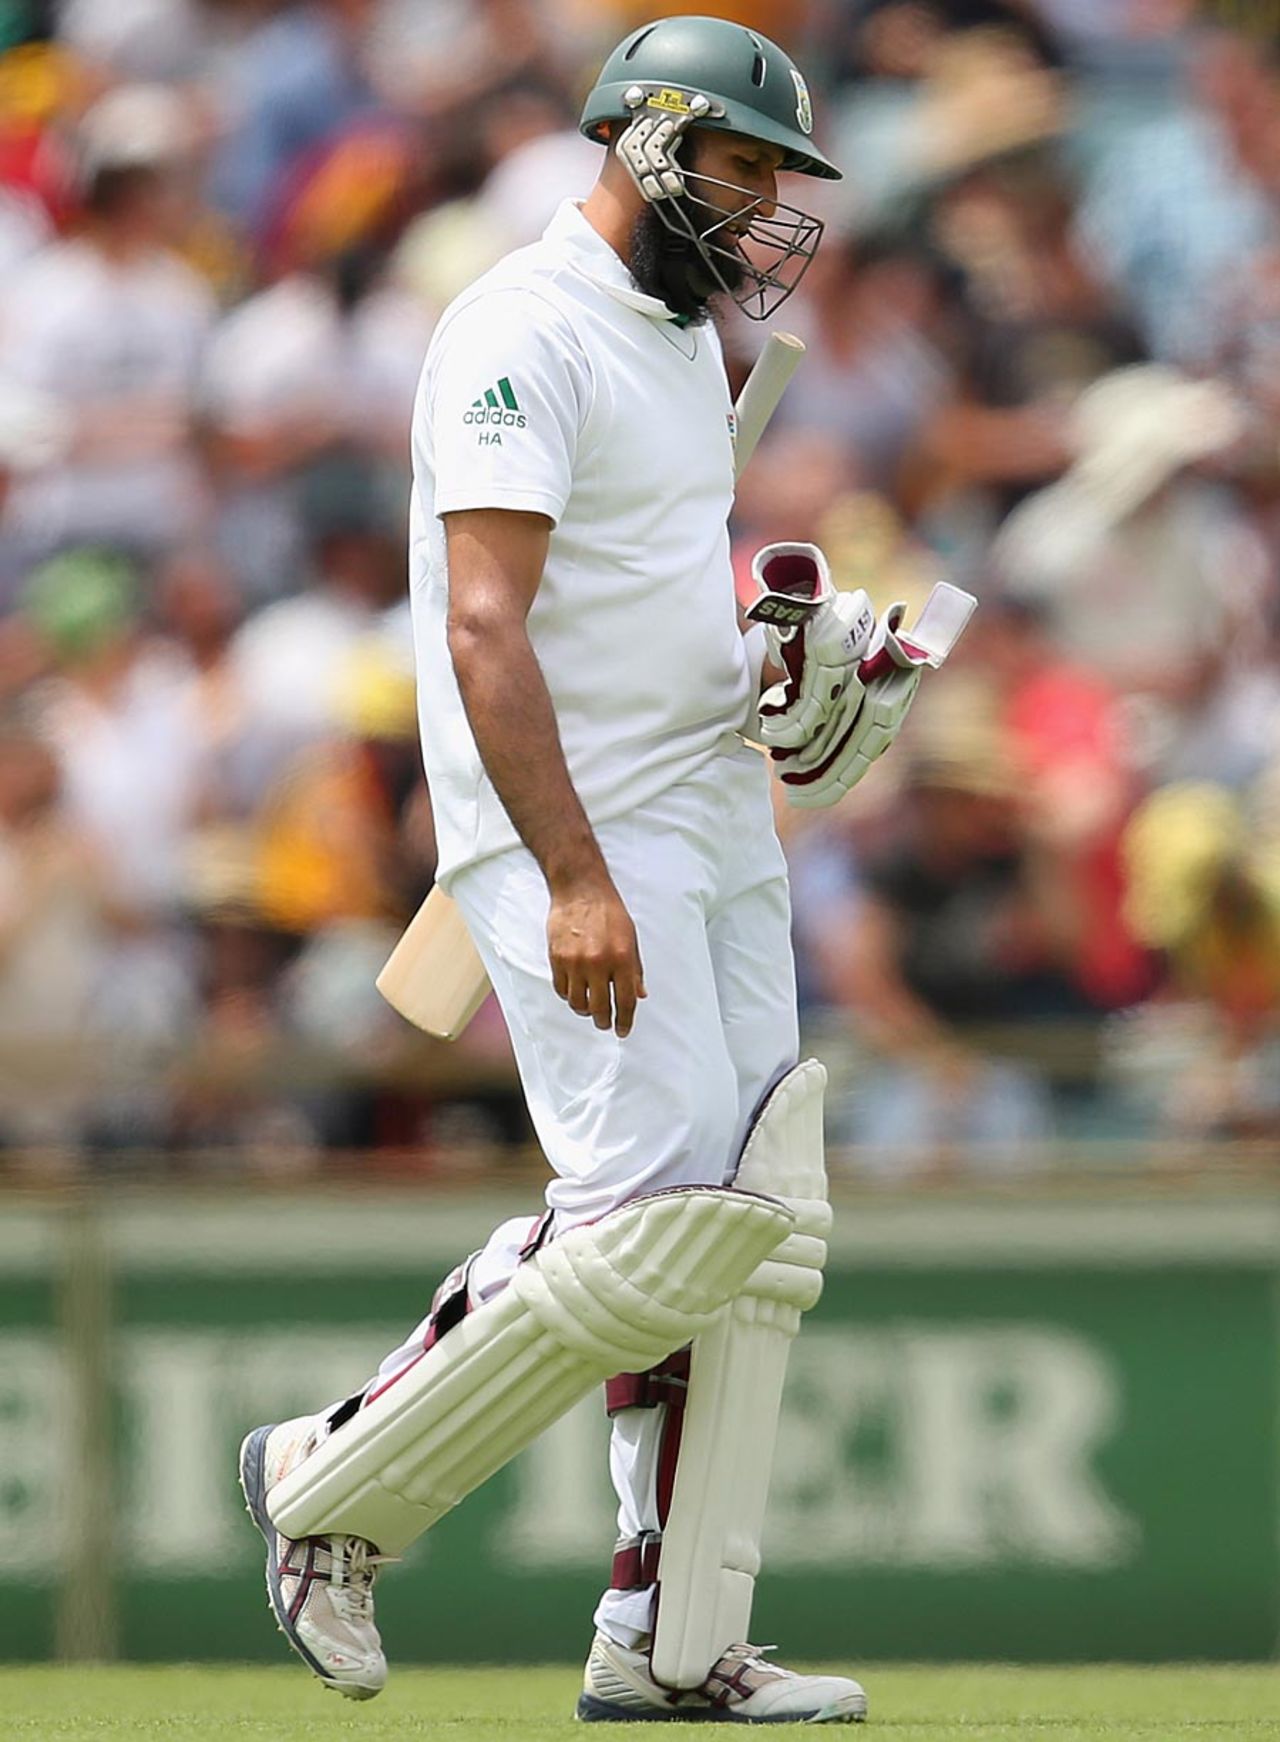 Hashim Amla slowly walks back to the pavilion after being run out, Australia v South Africa, 3rd Test, Perth, 1st day, November 30, 2012